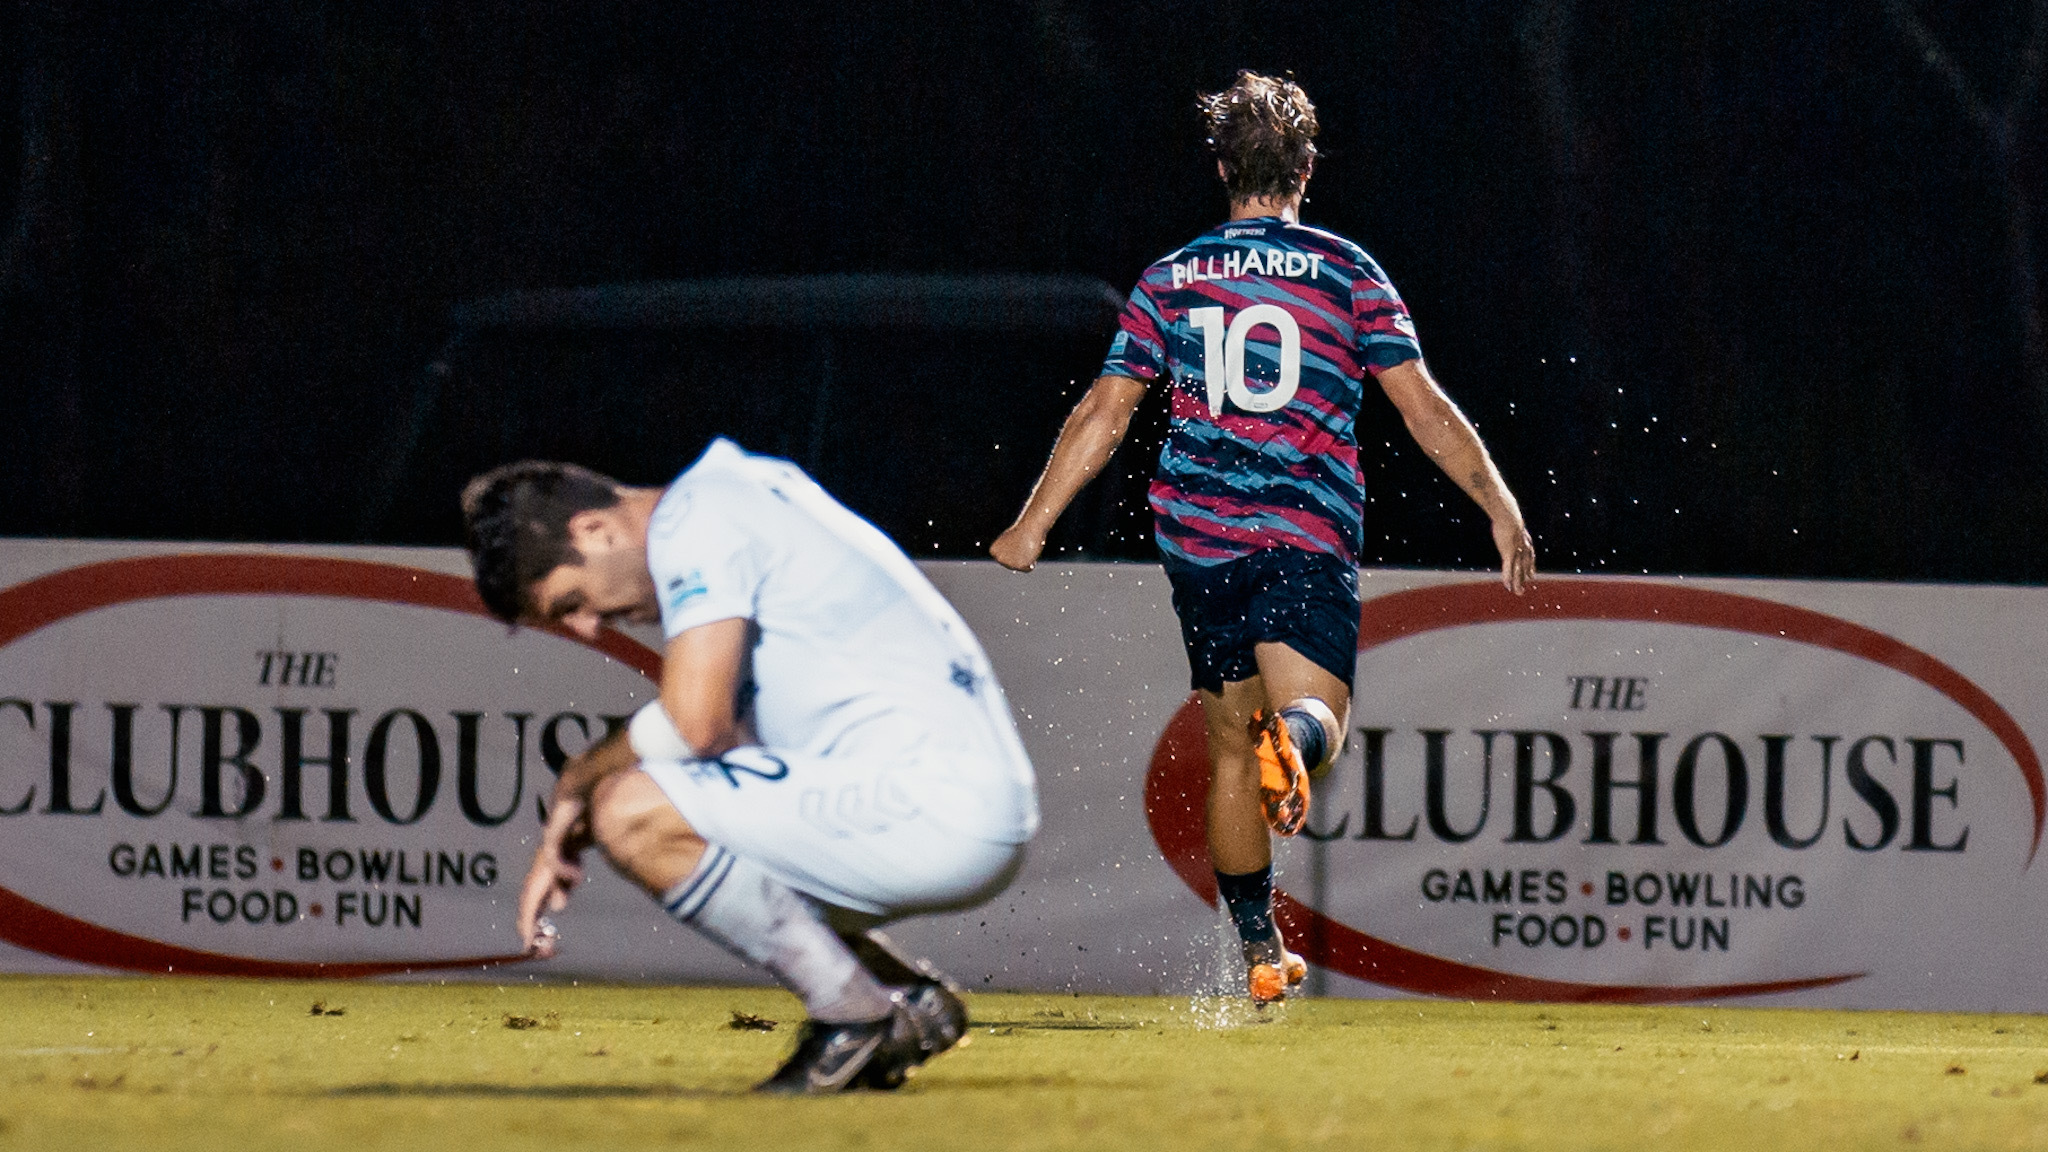 Adrian Billhardt Honored as 2022 USL League One Comeback Player of the Year featured image